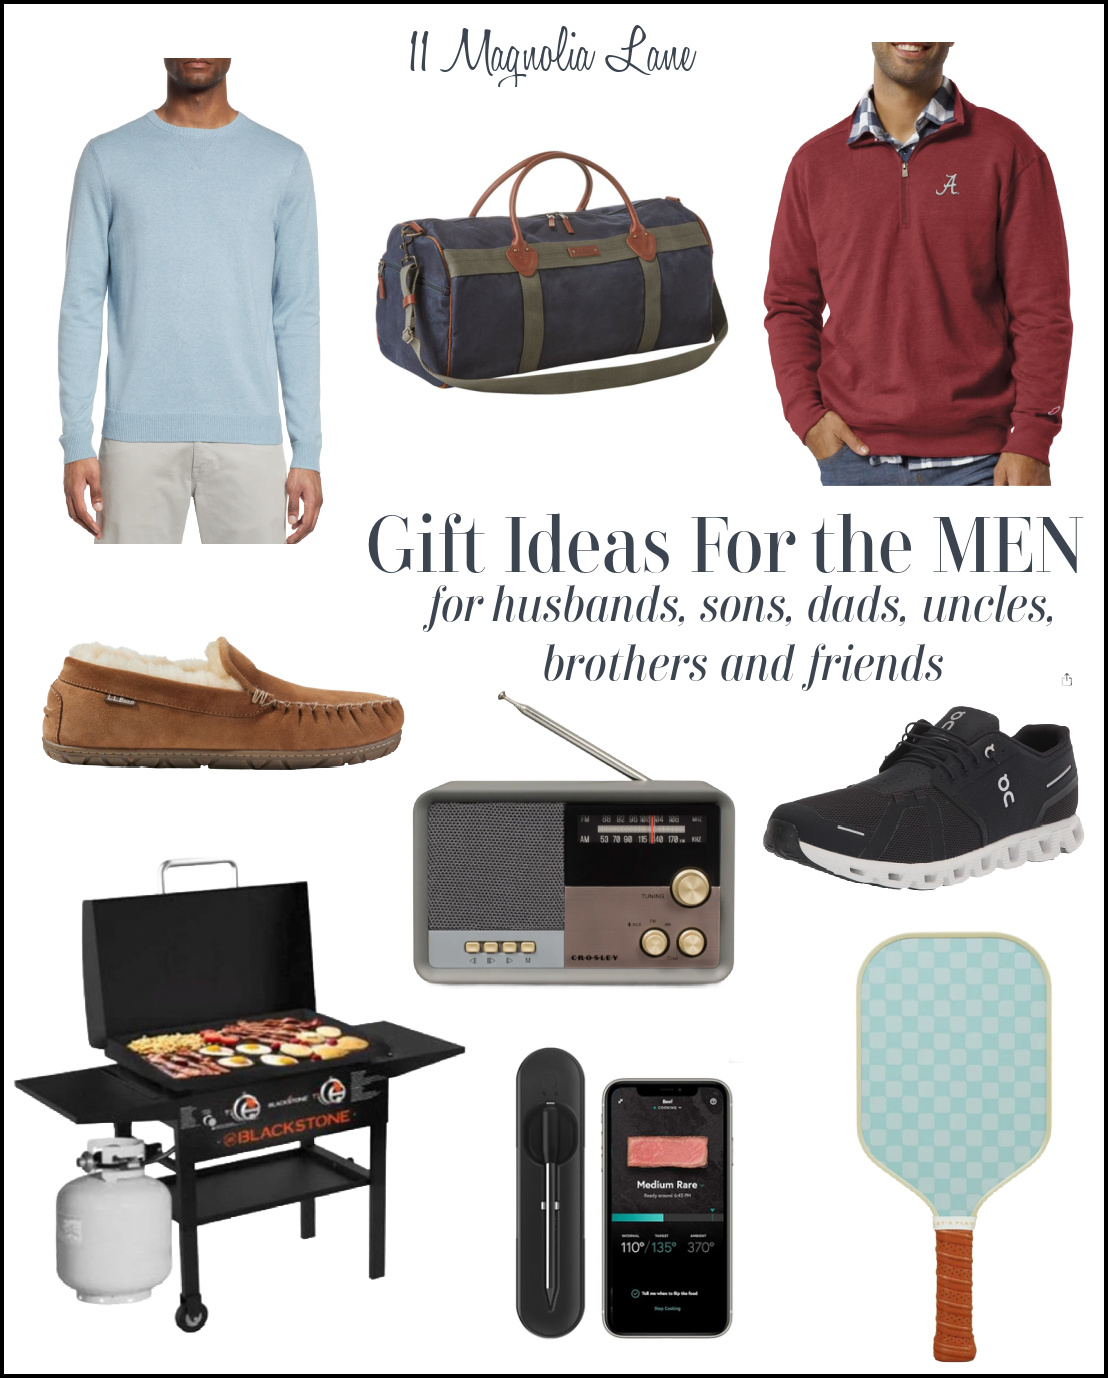 Christmas Gifts For Men He'll Love (+Stocking Stuffers)